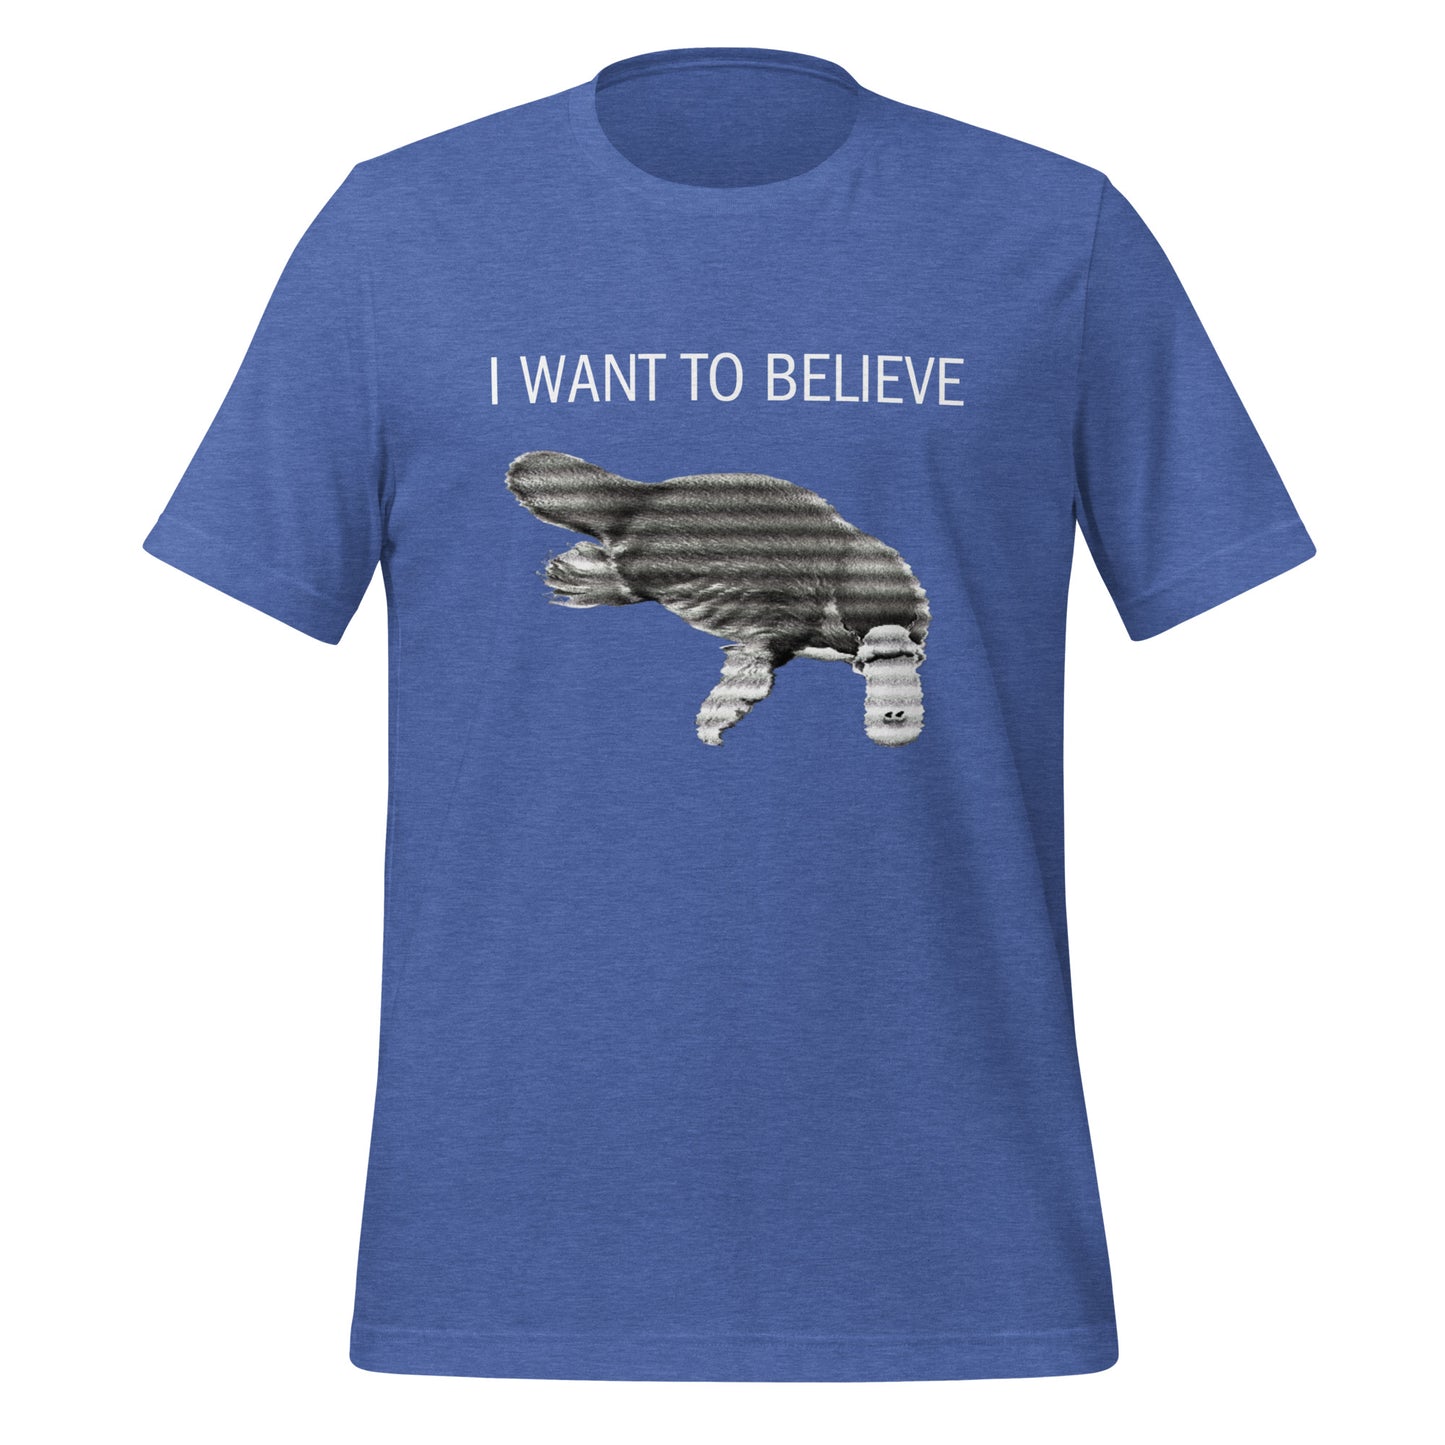 I Want To Believe - Unisex T